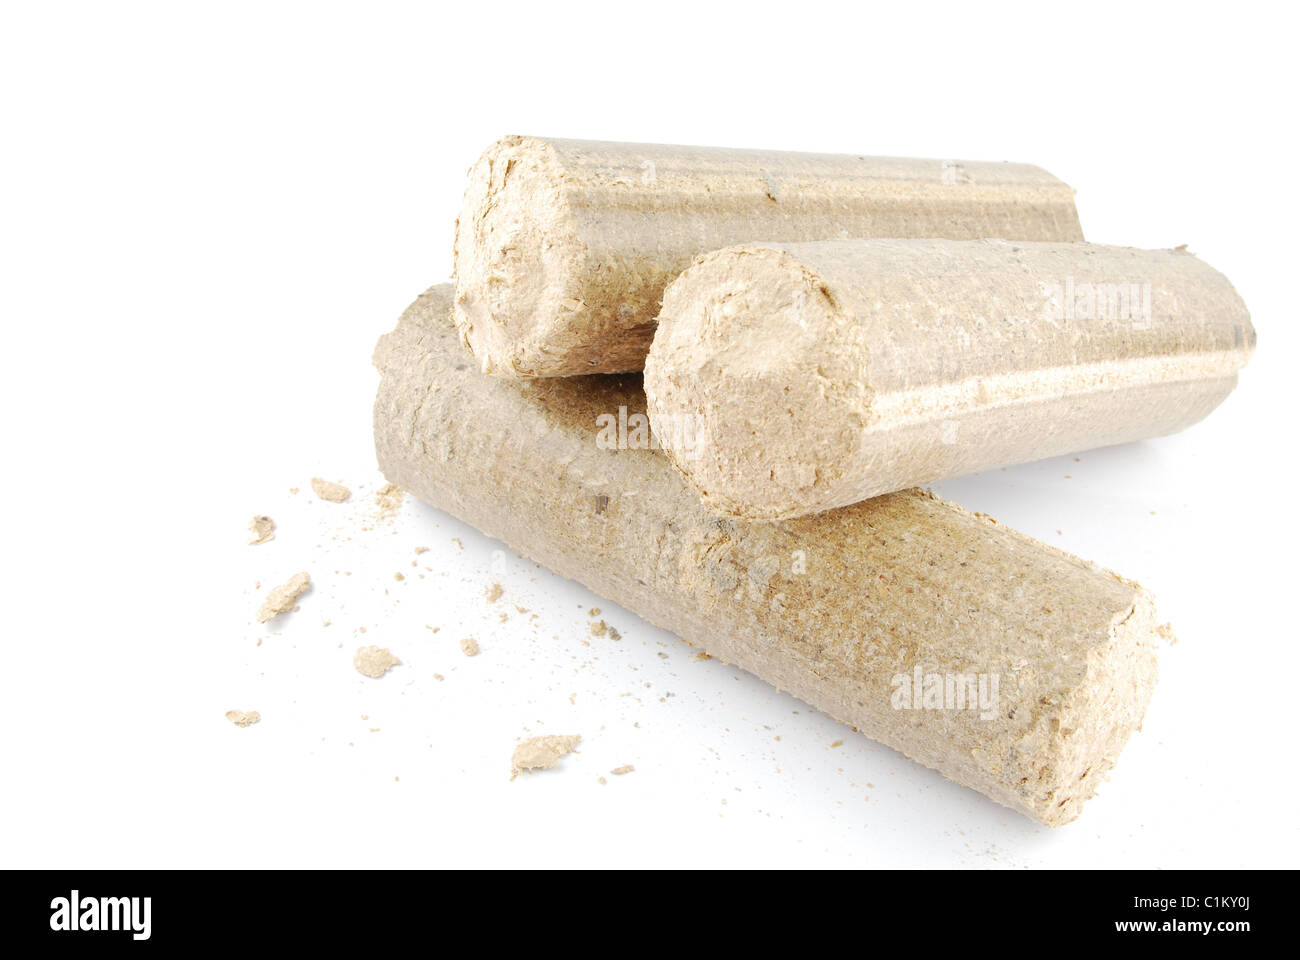 Briquettes and granulated firewood Stock Photo